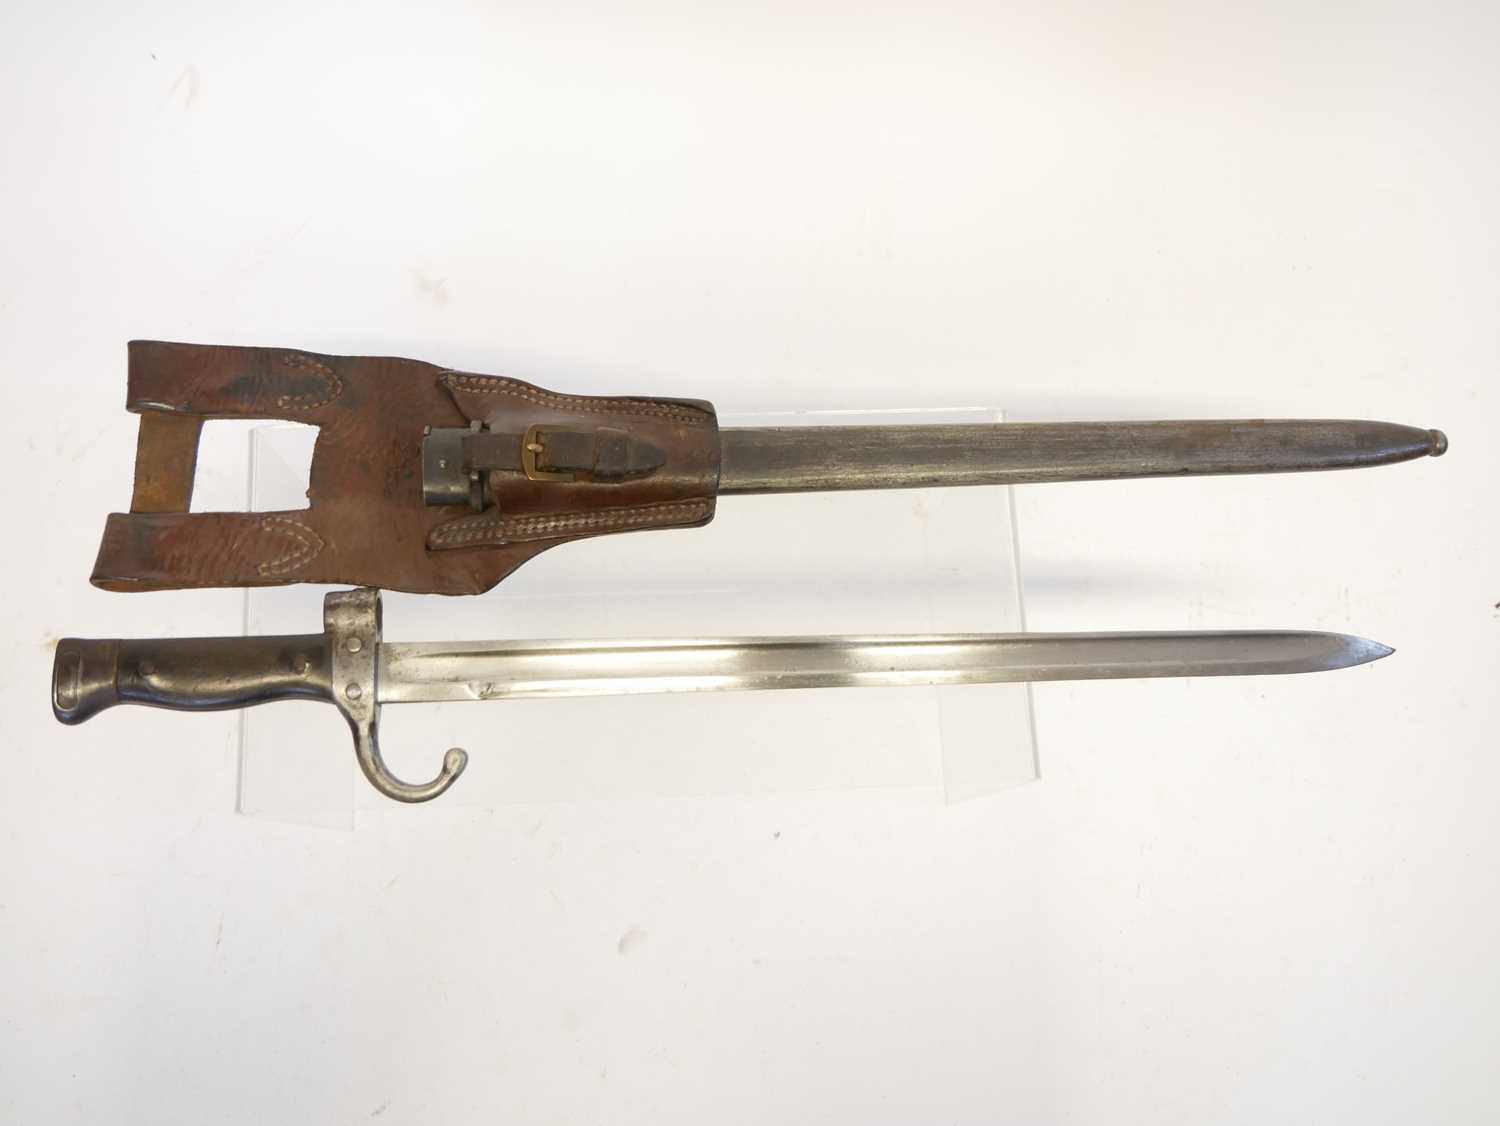 French 1892 Berthier 1st pattern bayonet and scabbard, with leather frog stamped E203. Buyer must be - Image 2 of 9